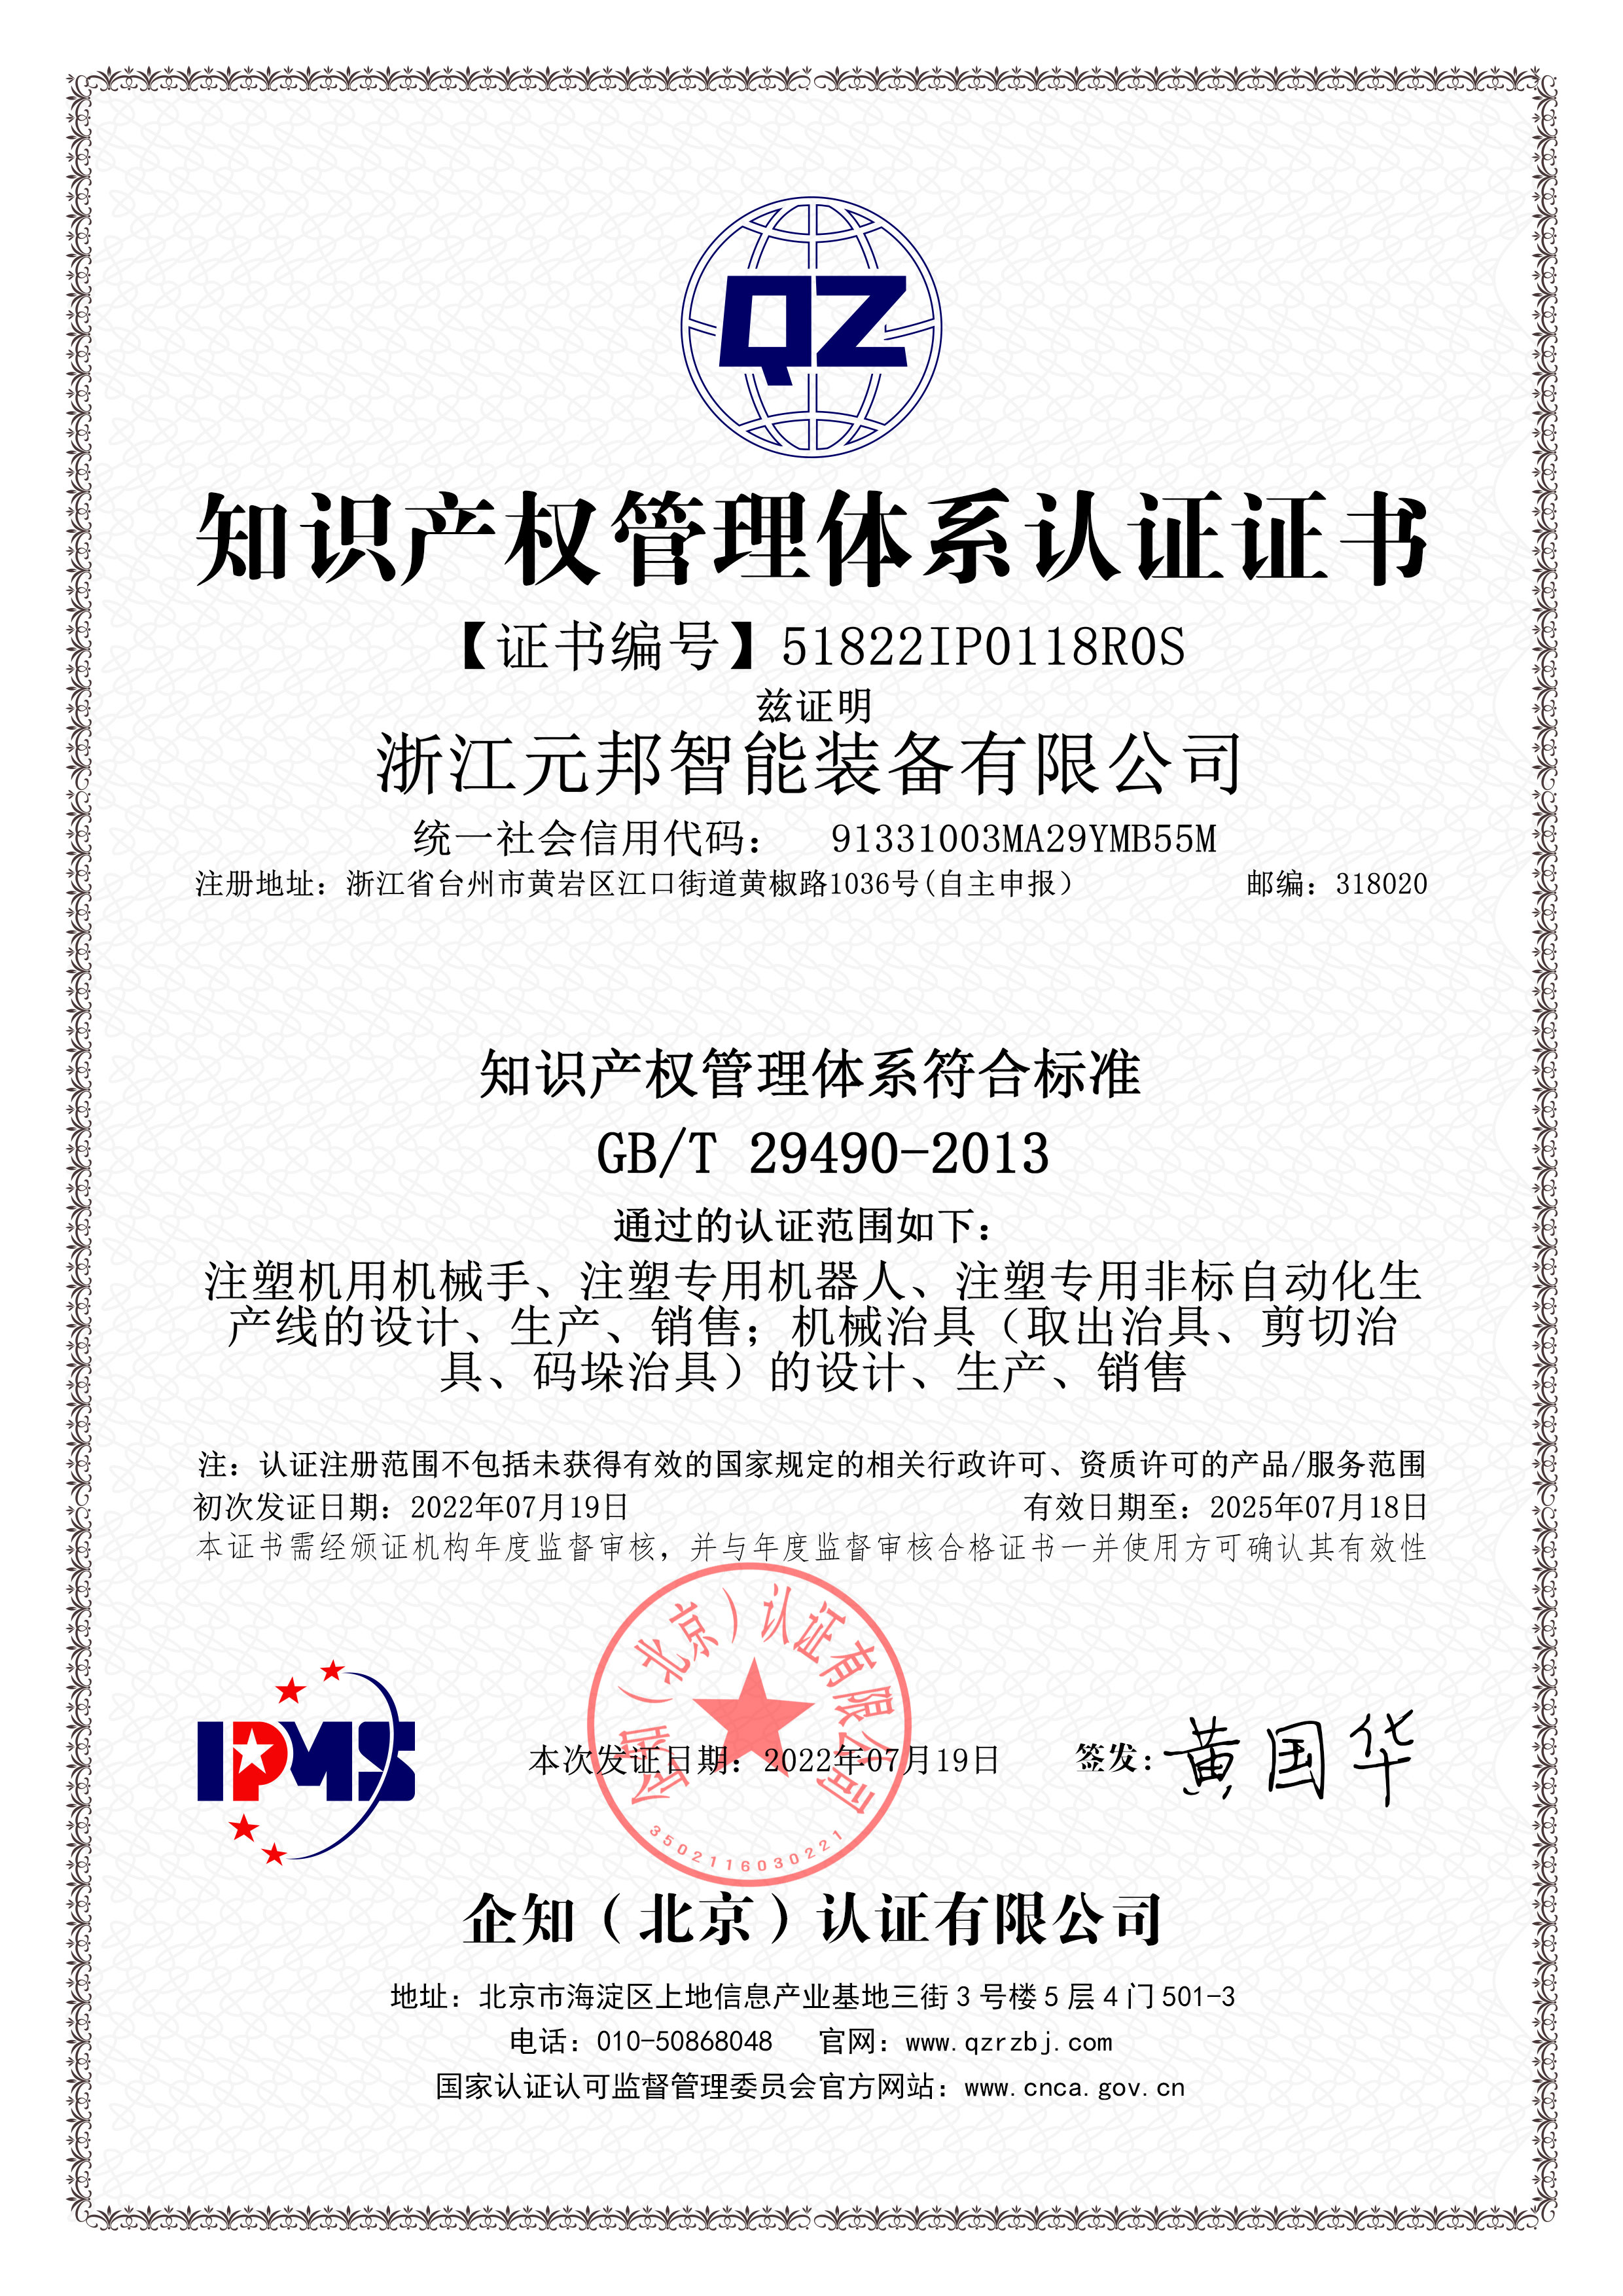 Chinese Certificate 